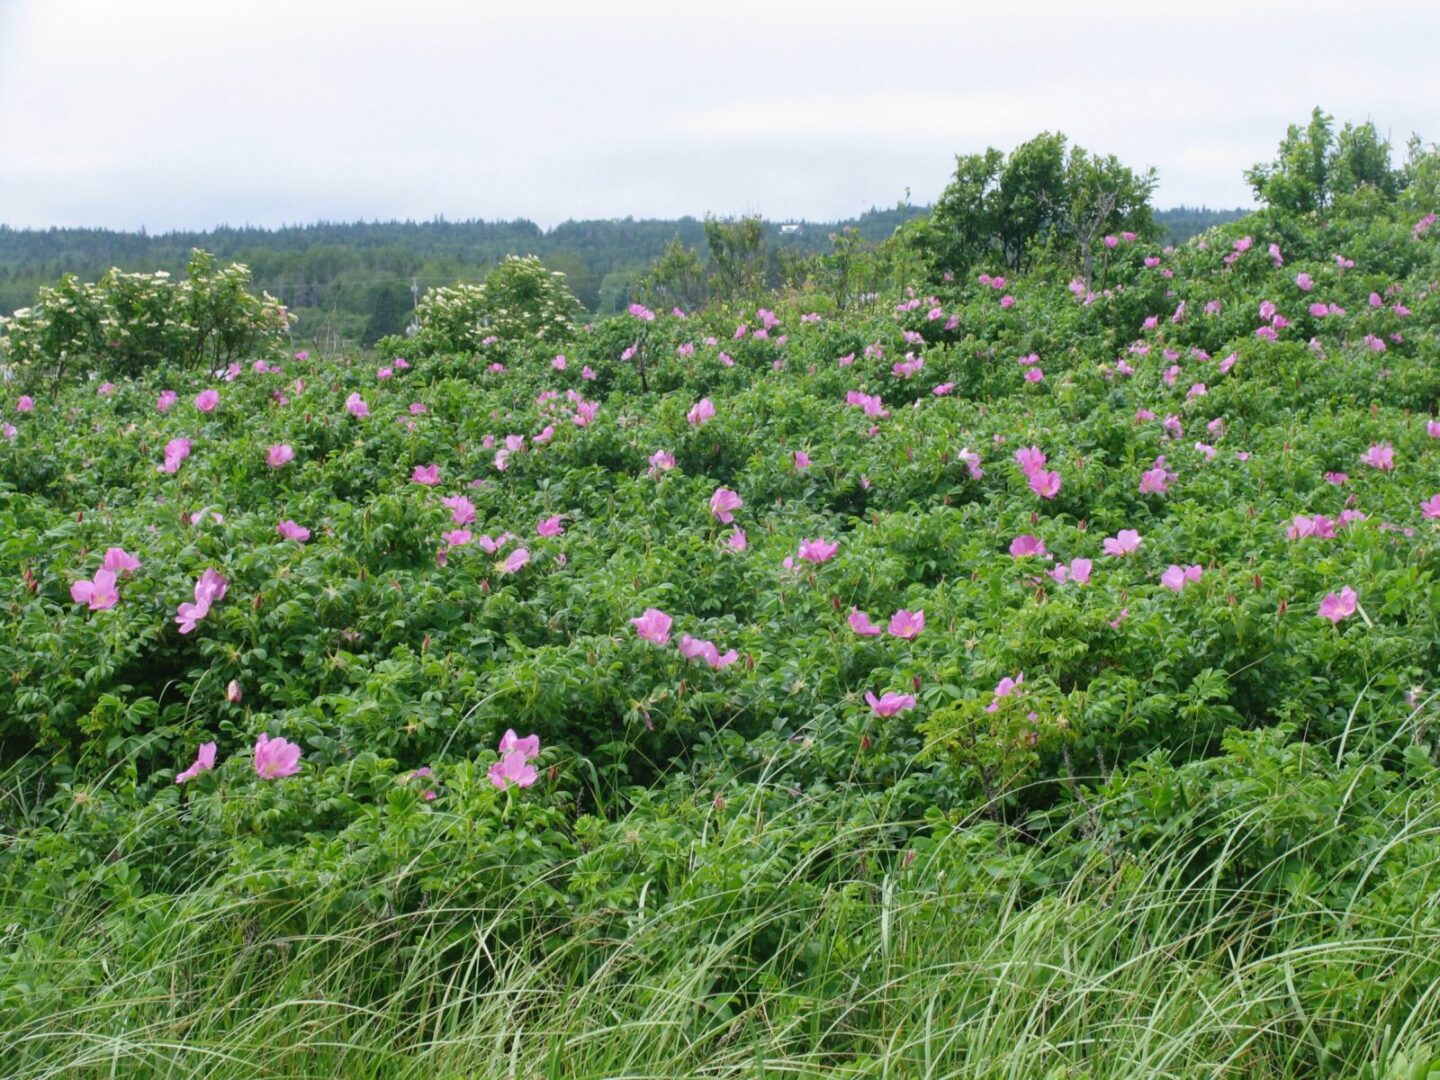 A field of pink flowers in the middle of a field.